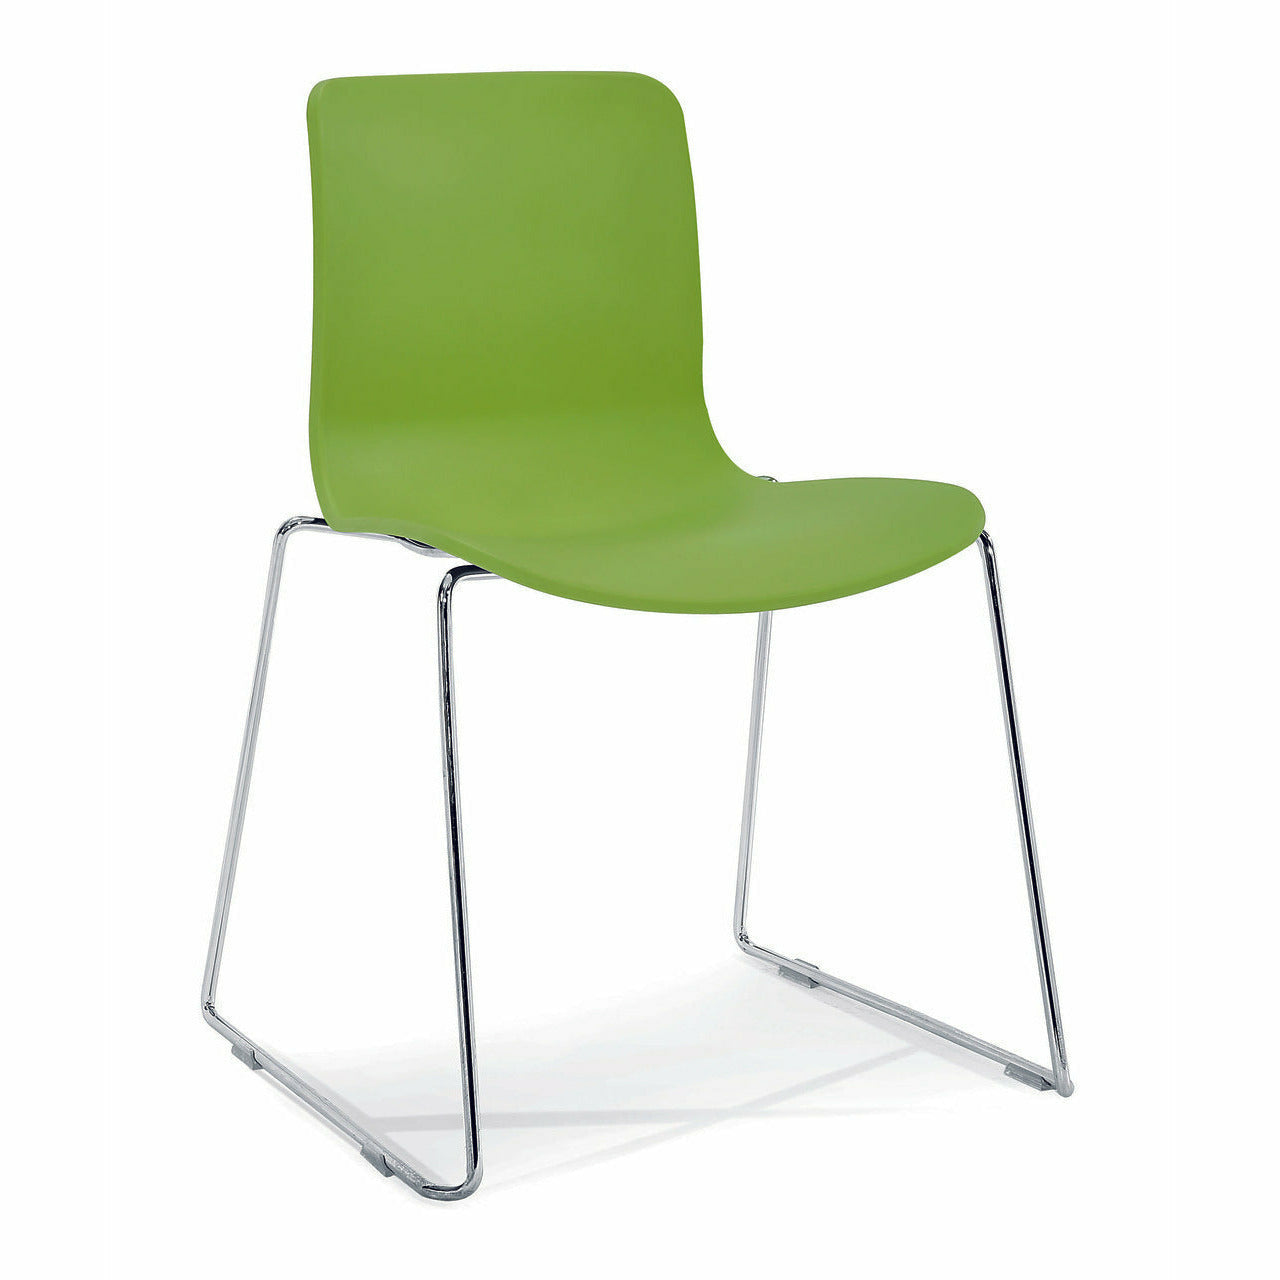 Acti Chair